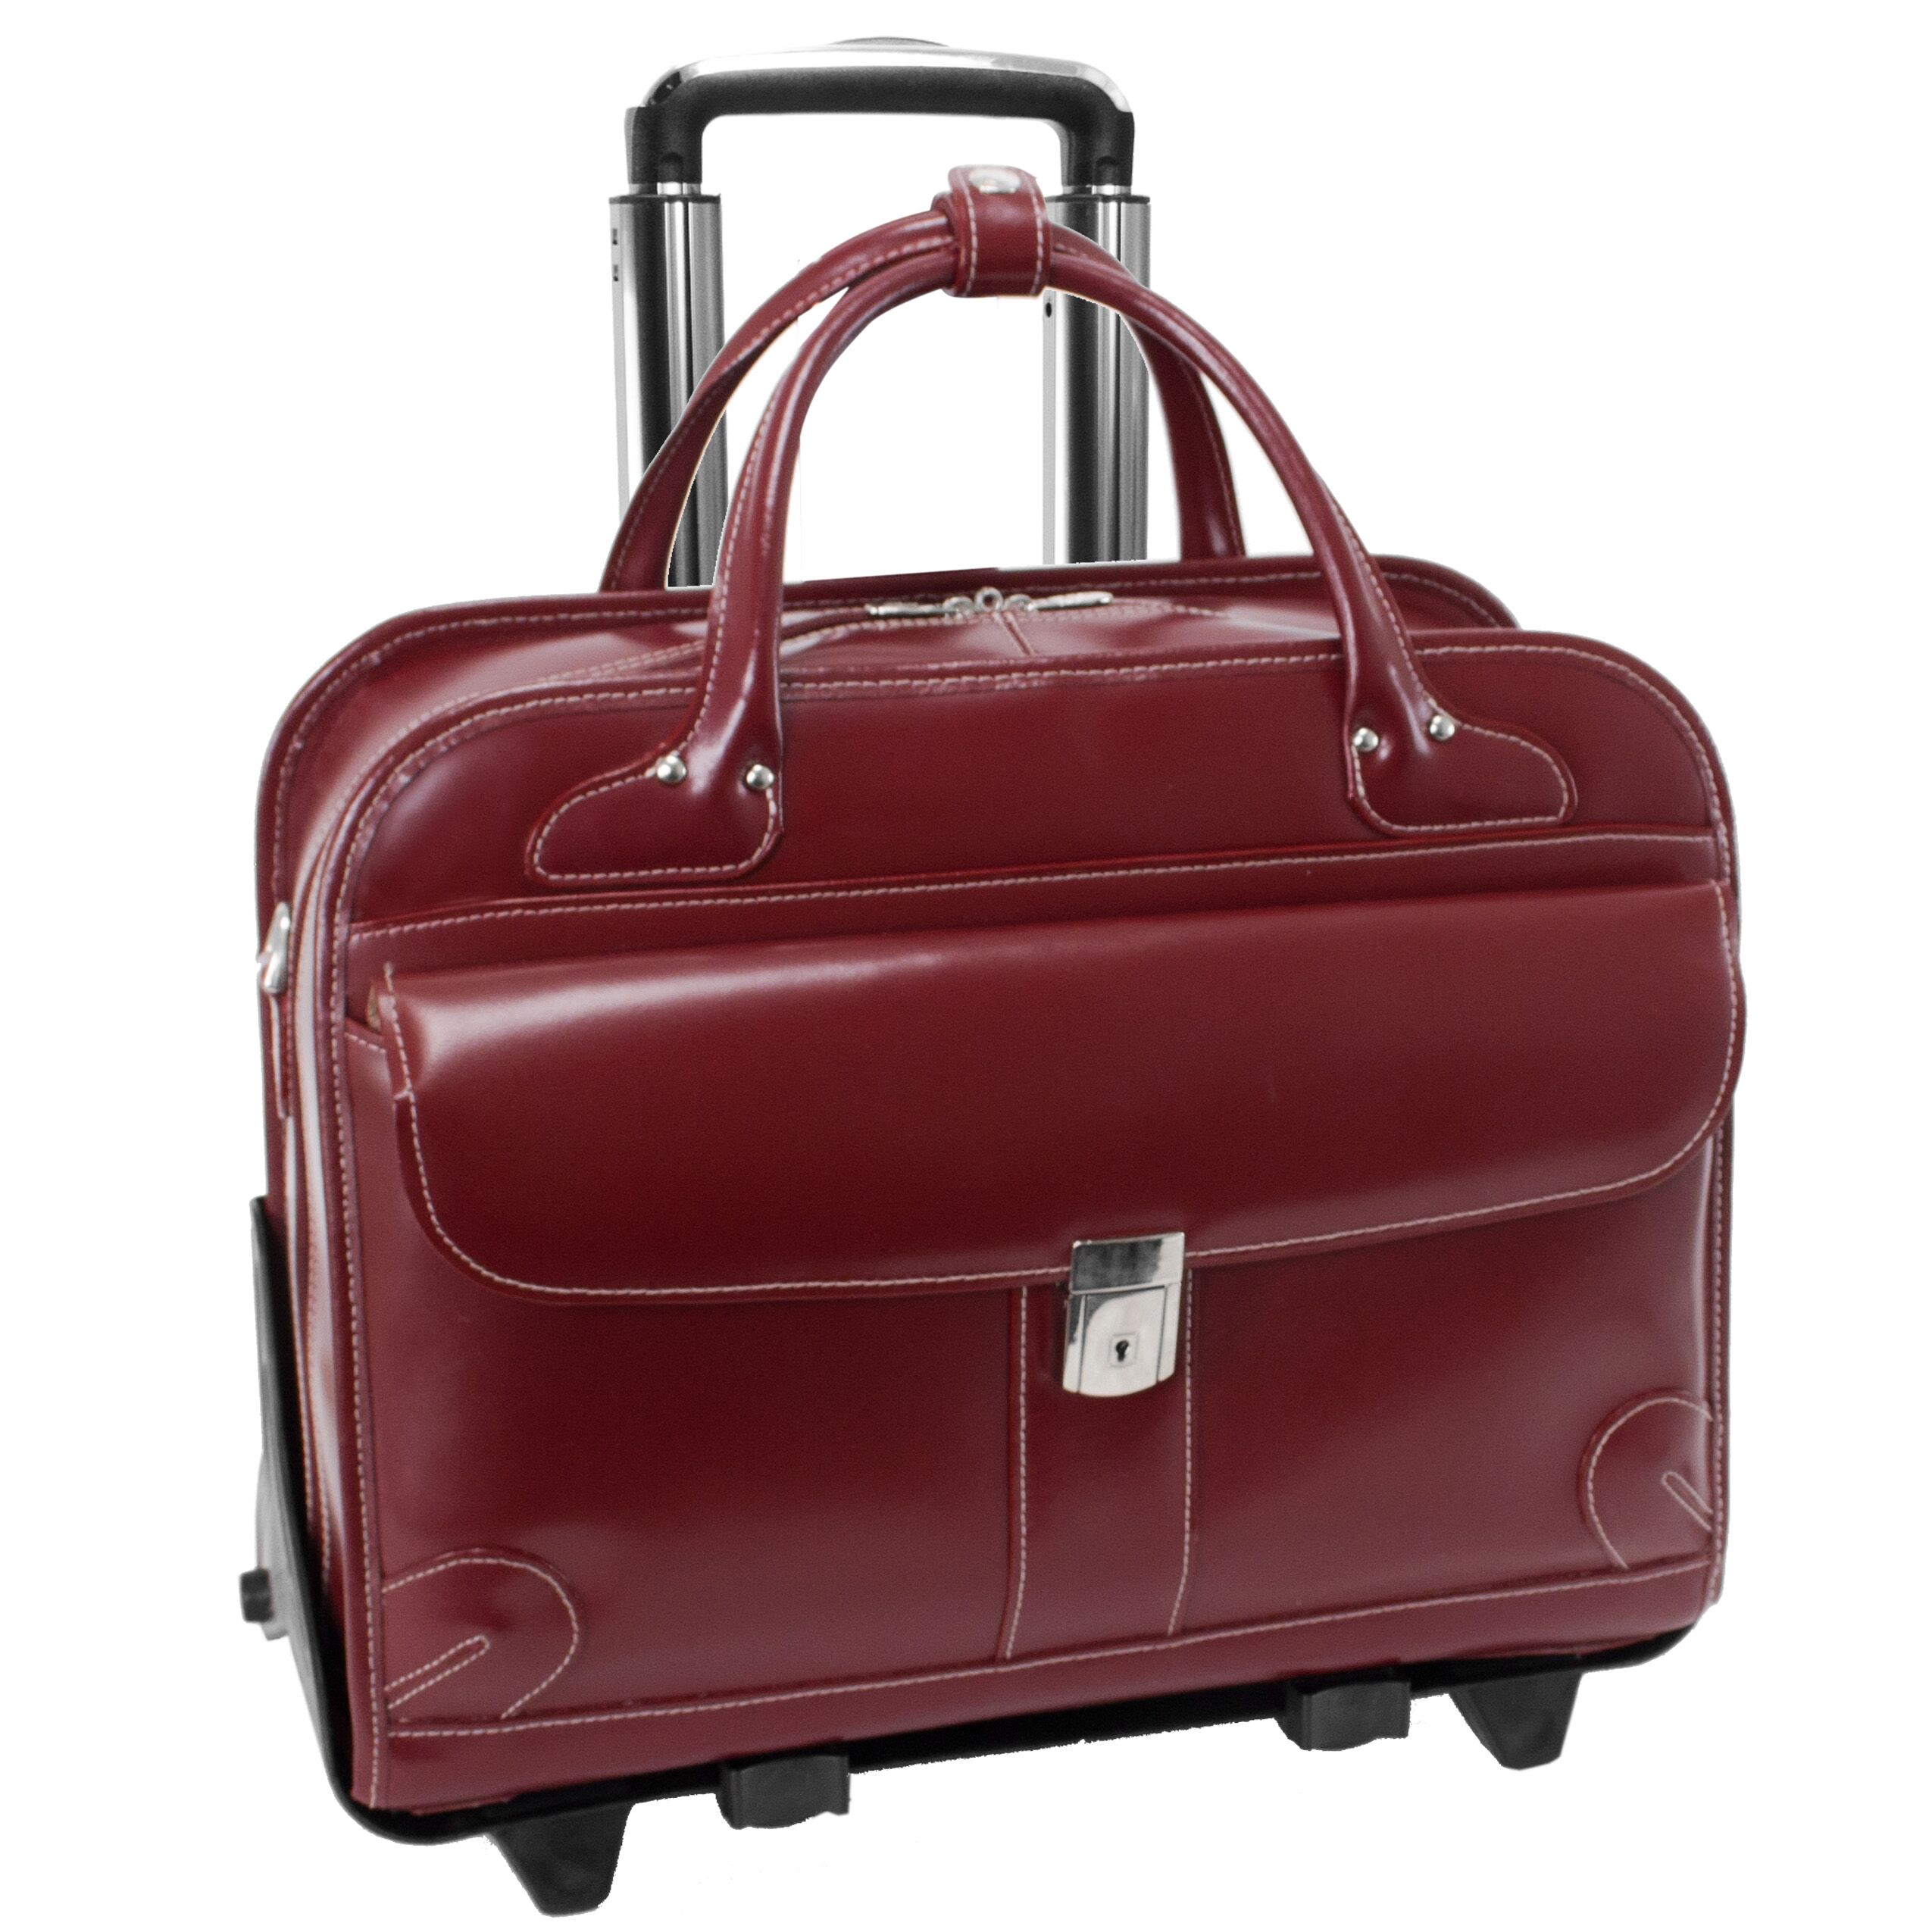 Mcklein 96616 Lakewood 96616- Red Leather Fly-through Checkpoint-friendly Detachable-wheeled Ladies Briefcase